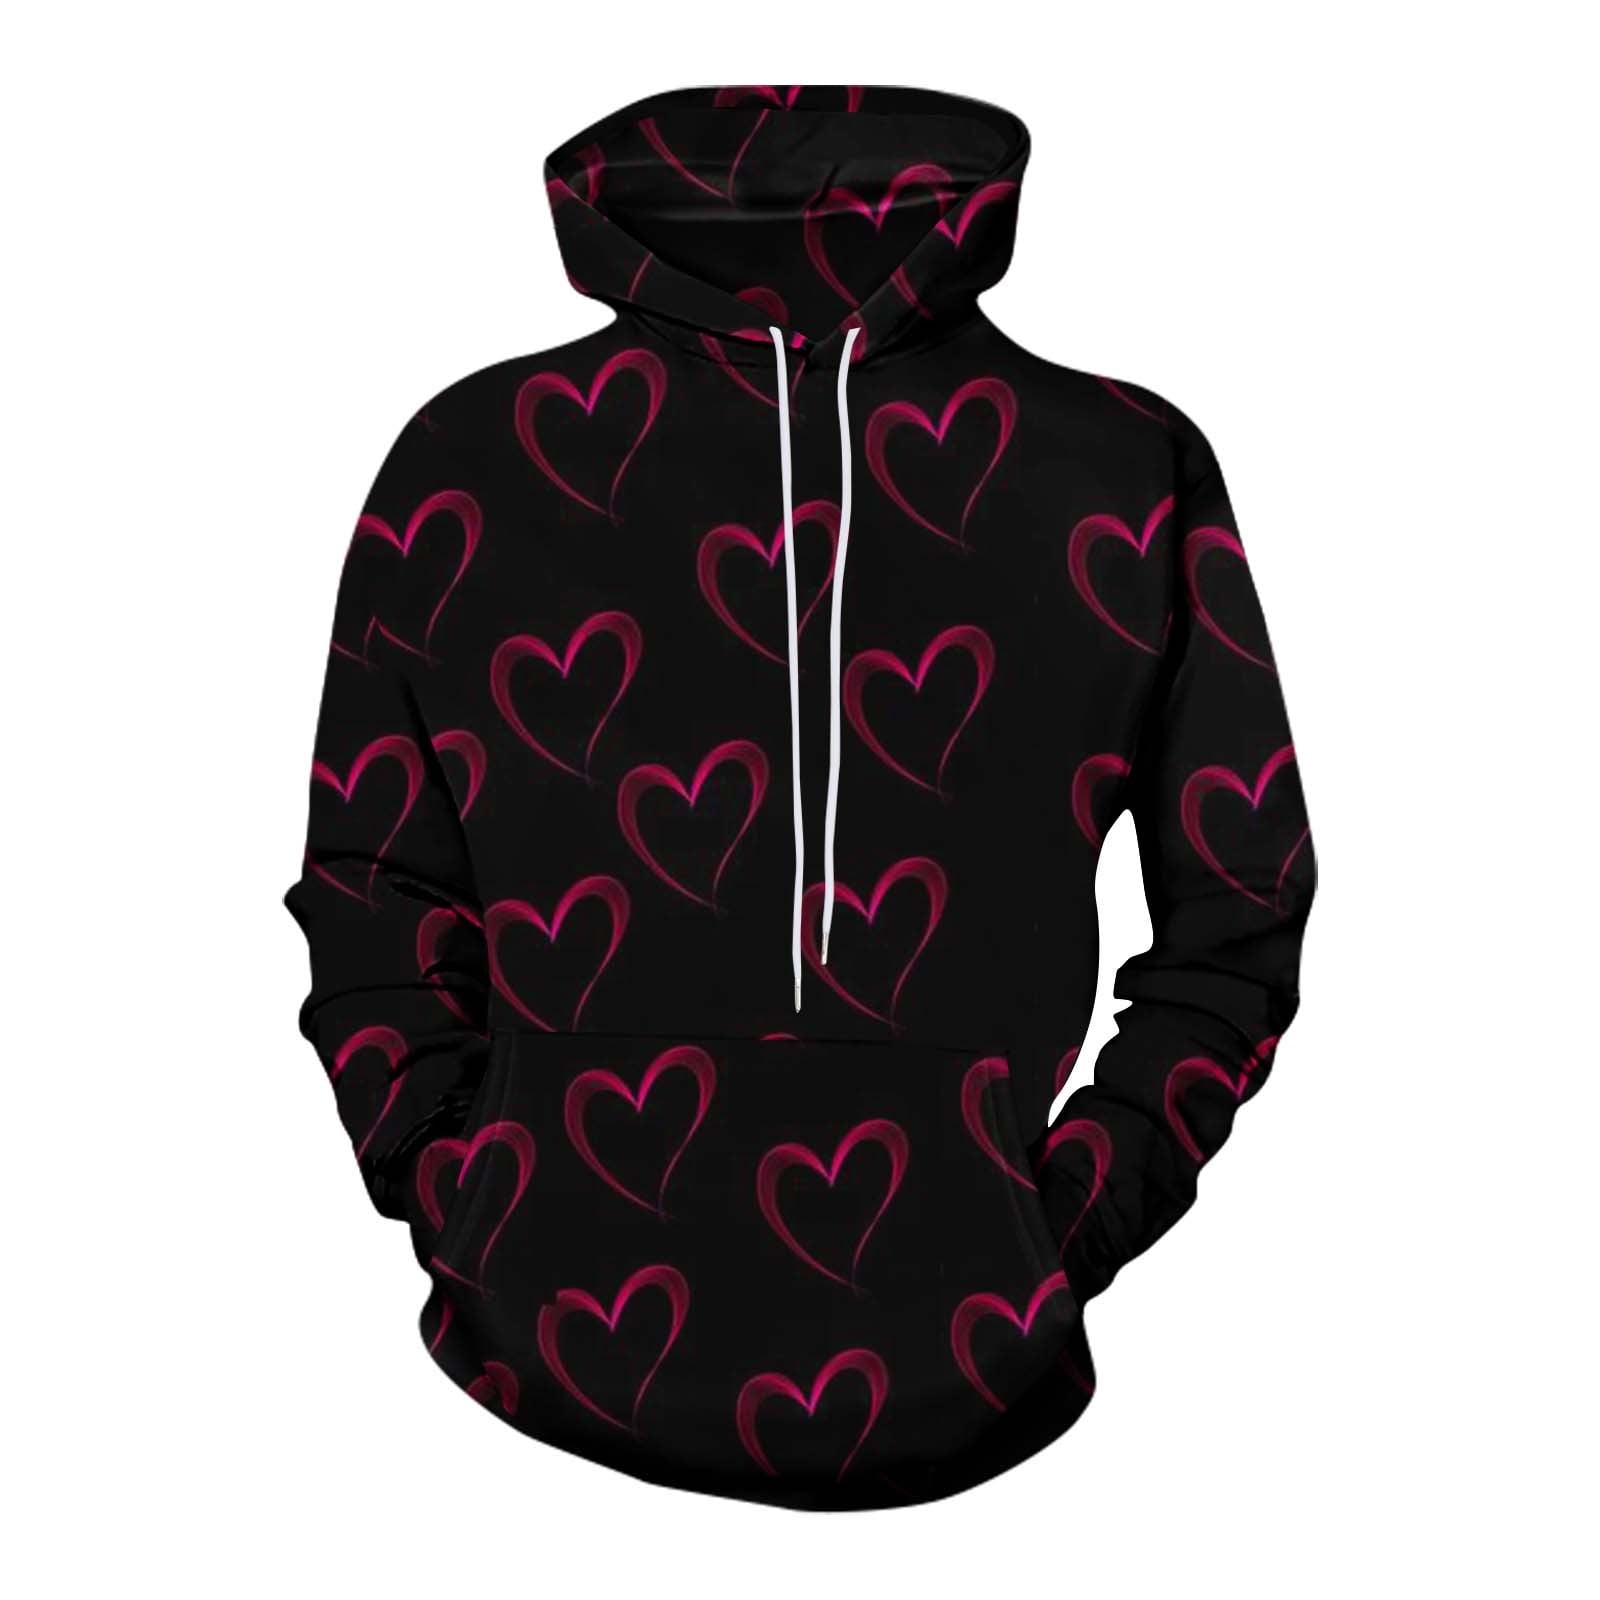 HTNBO Mens Graphic Hoodies for Valentine's Day Plus Size Drawstring ...